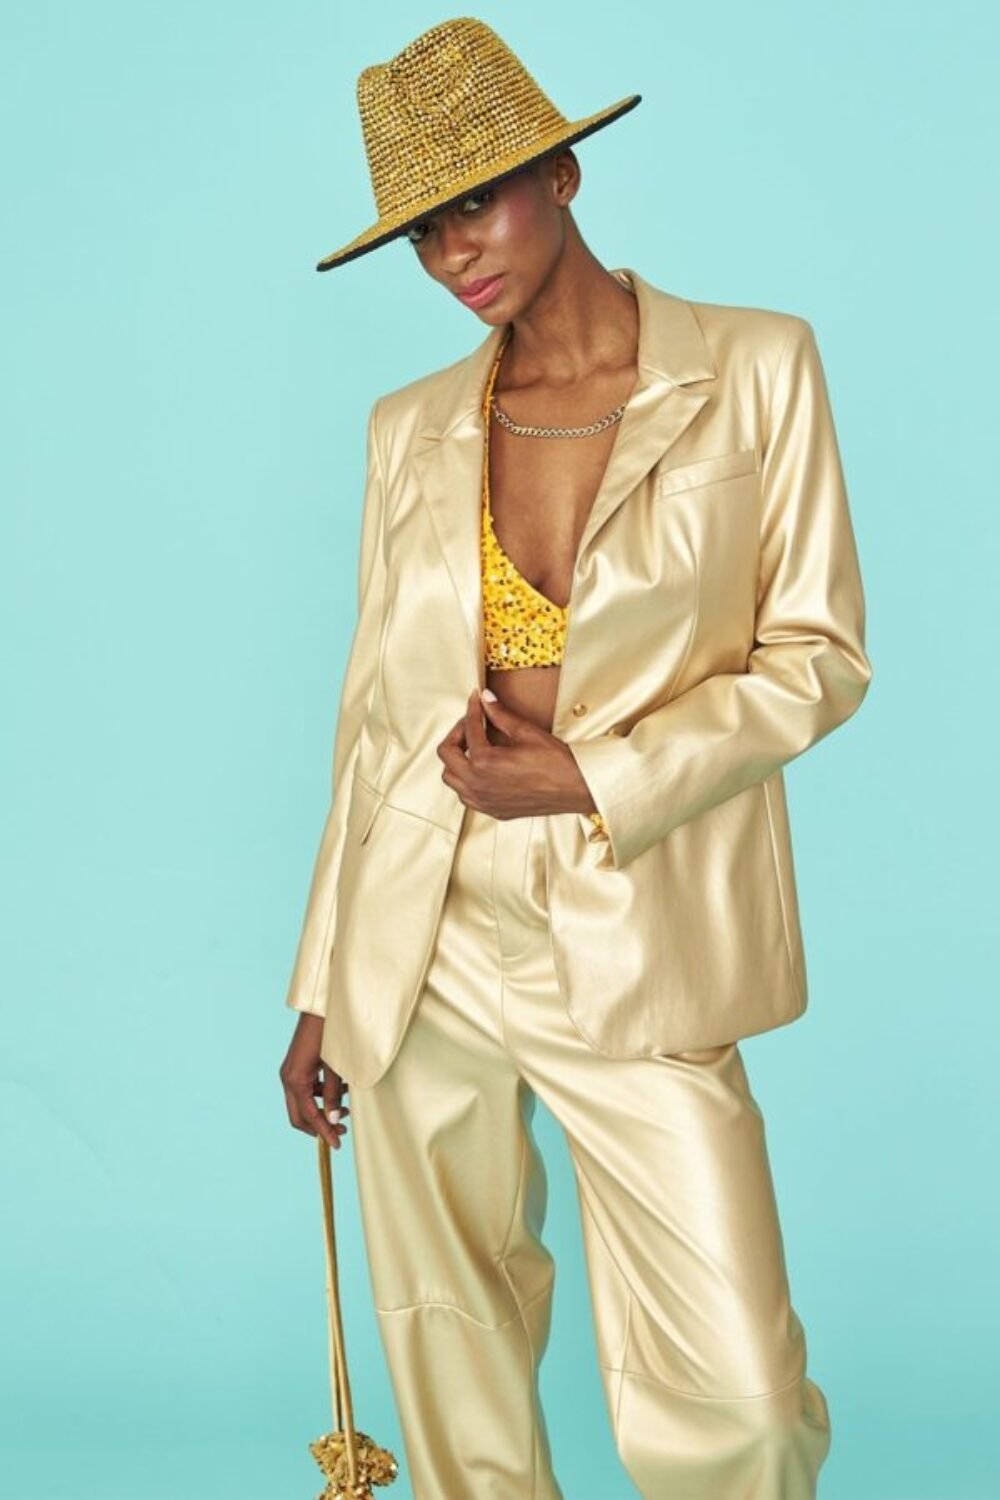 Shop Lux Faux leather Kate Blazer in Gold and women's luxury and designer clothes at www.lux-apparel.co.uk